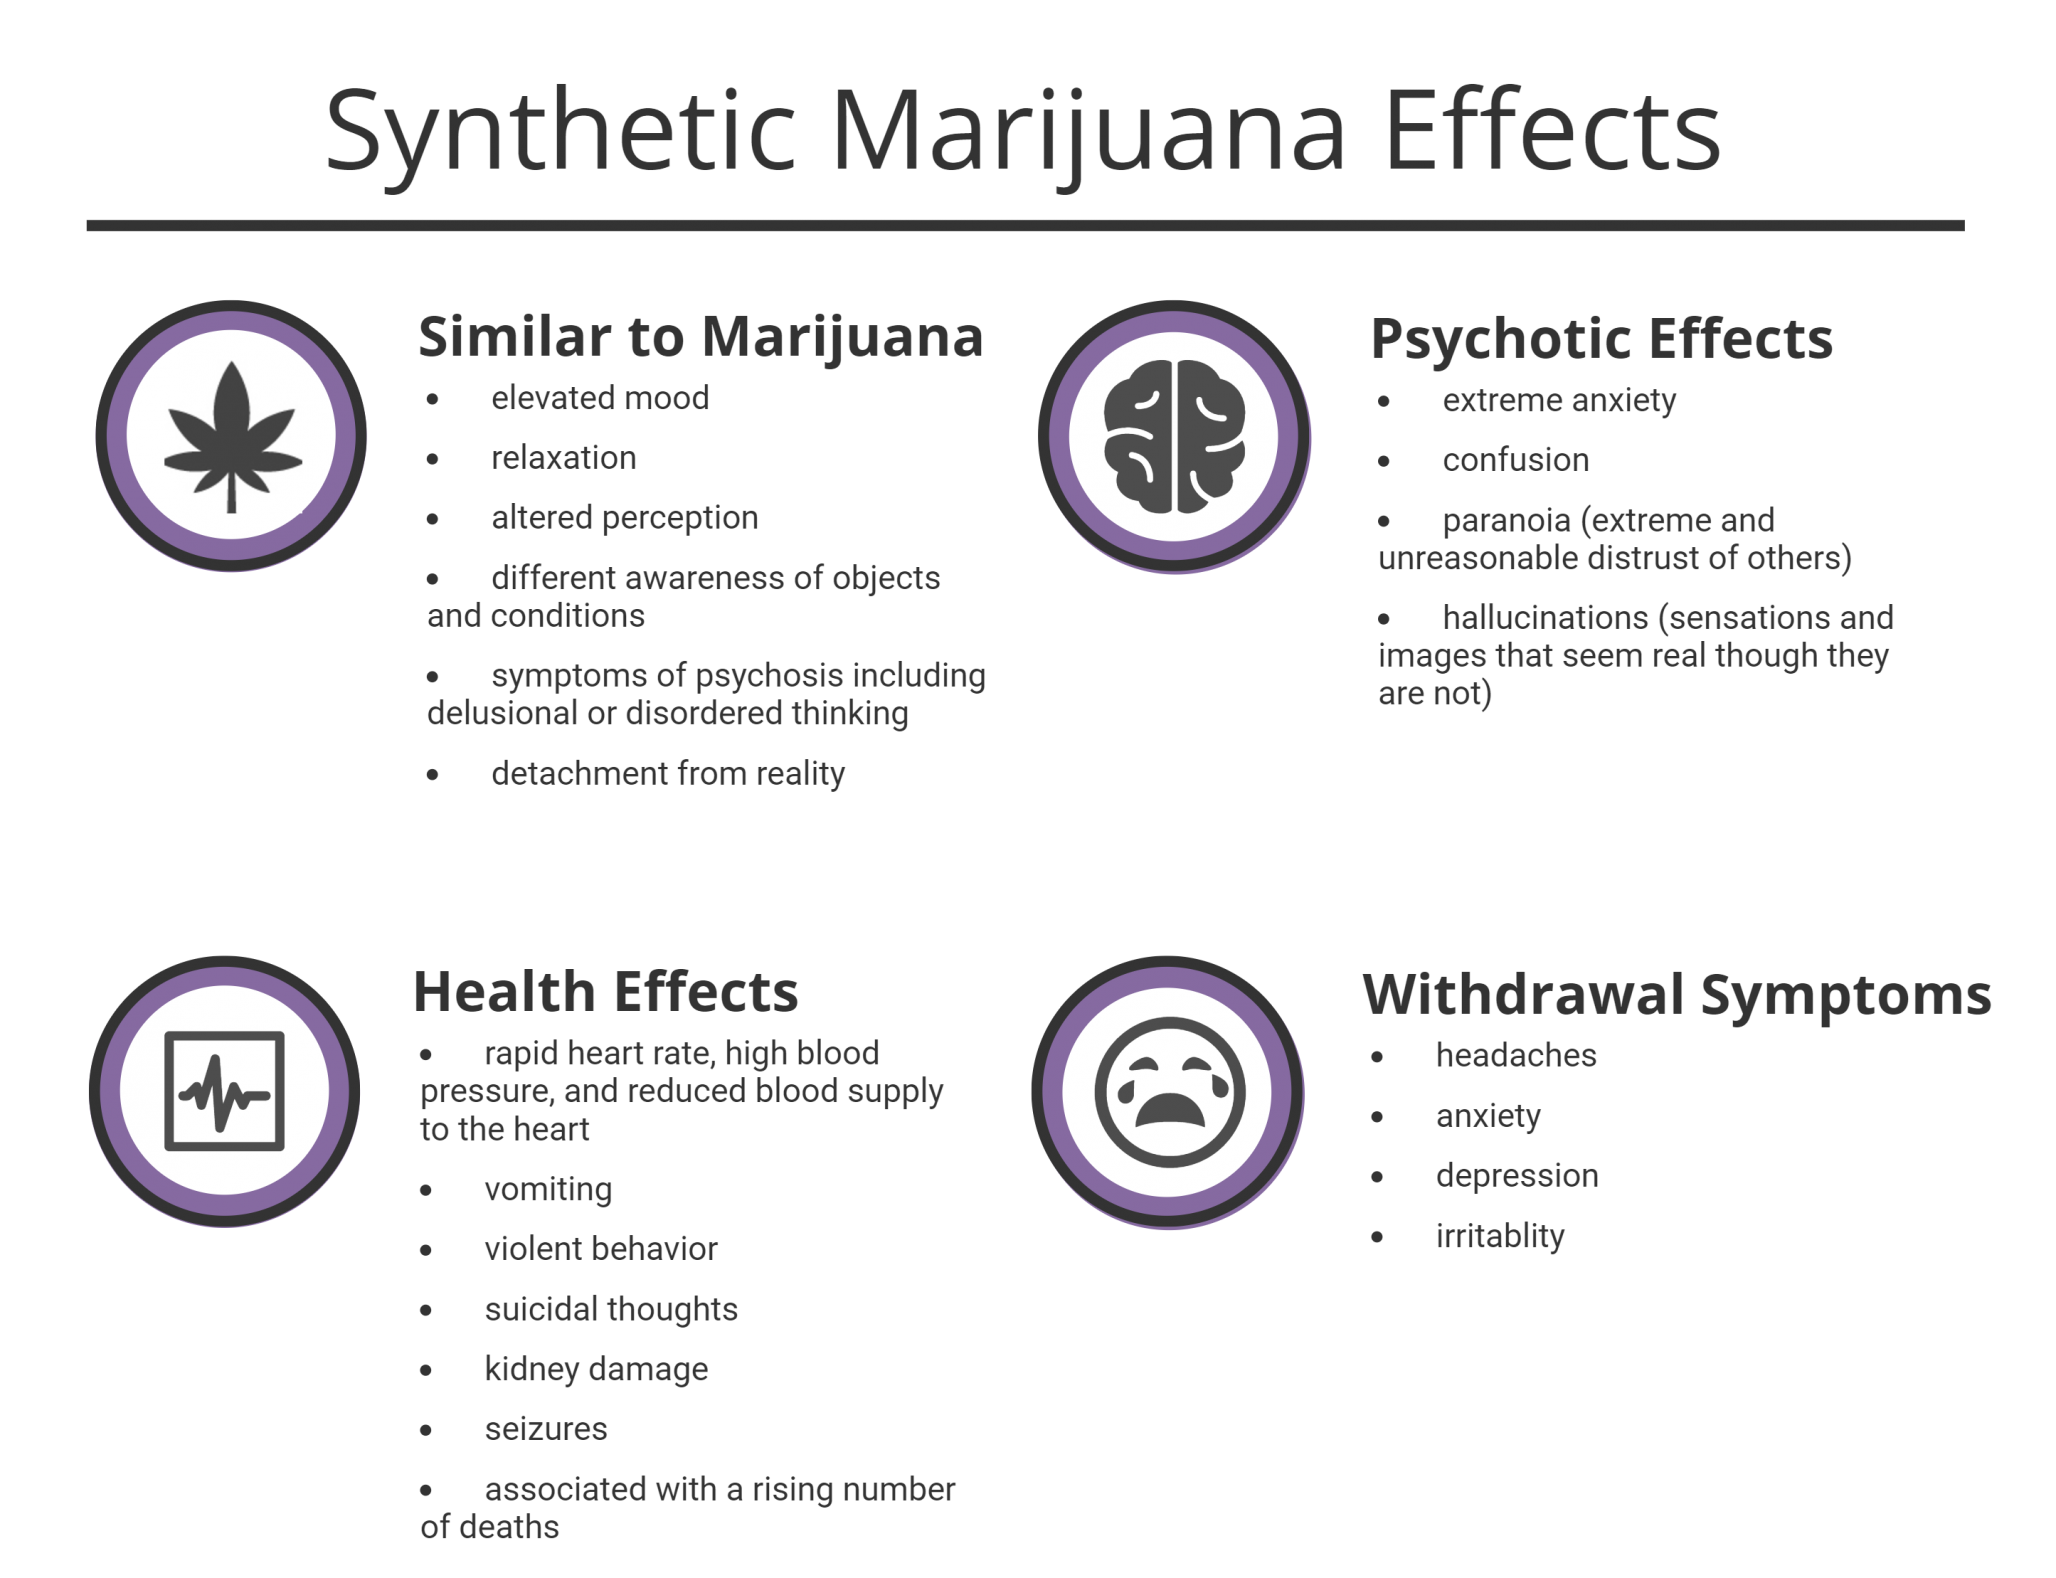 Synthetic Marijuana Has a range of effects. Some are similar to marijuana, but it can also cause psychotic effects, other health effects, and withdrawal symptoms